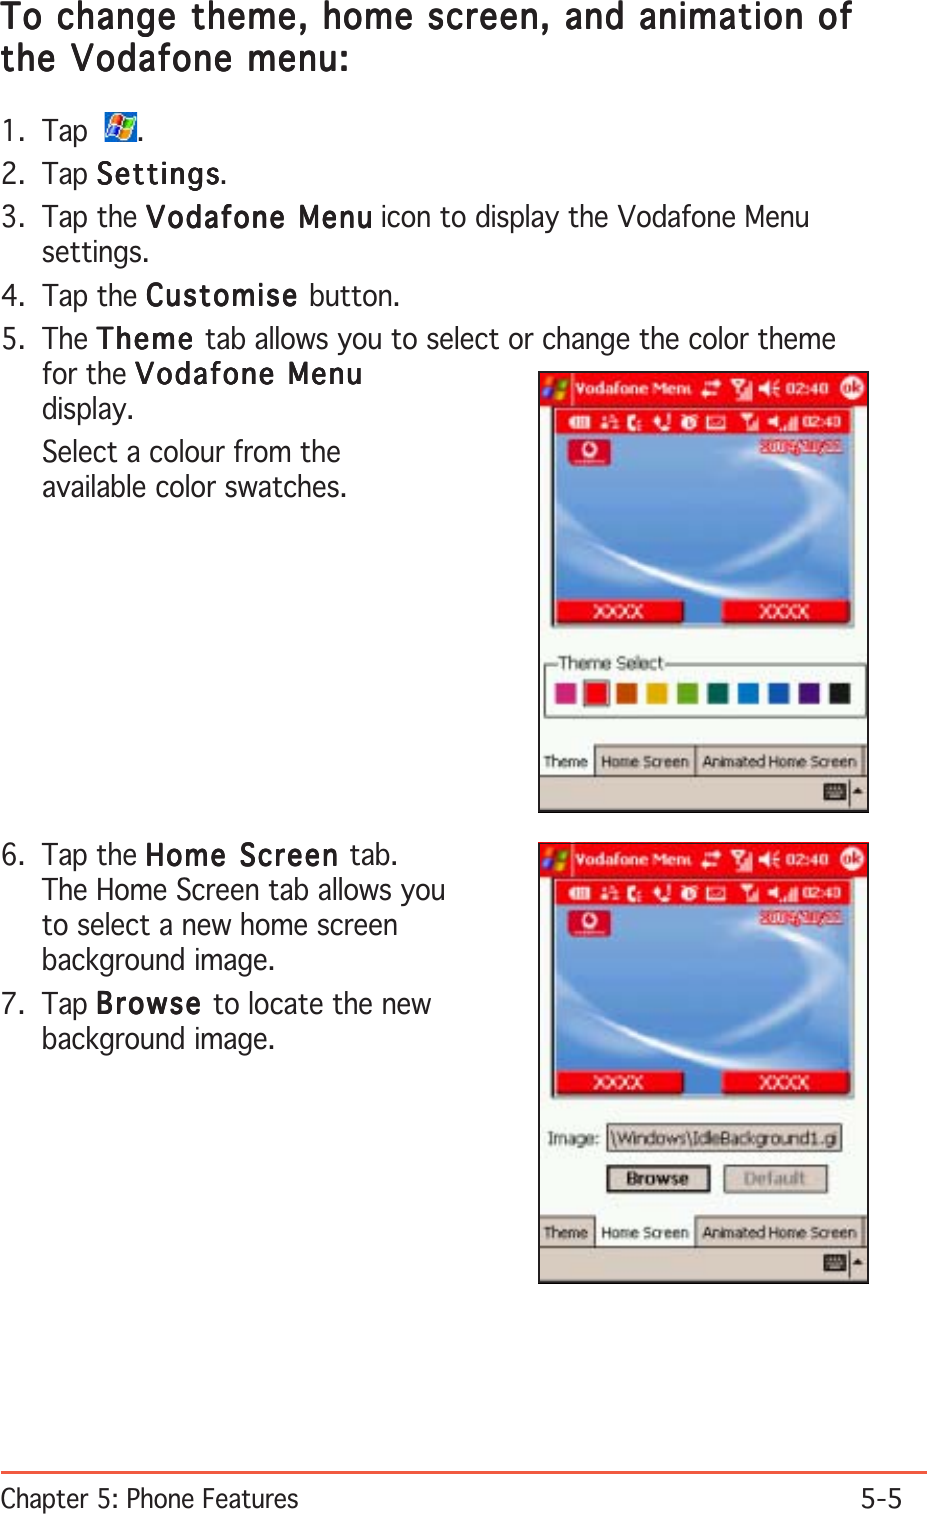 Chapter 5: Phone Features5-5To change theme, home screen, and animation ofTo change theme, home screen, and animation ofTo change theme, home screen, and animation ofTo change theme, home screen, and animation ofTo change theme, home screen, and animation ofthe Vodafone menu:the Vodafone menu:the Vodafone menu:the Vodafone menu:the Vodafone menu:1. Tap   .2. Tap SettingsSettingsSettingsSettingsSettings.3. Tap the Vodafone MenuVodafone MenuVodafone MenuVodafone MenuVodafone Menu icon to display the Vodafone Menusettings.4. Tap the CustomiseCustomiseCustomiseCustomiseCustomise button.5. The ThemeThemeThemeThemeTheme tab allows you to select or change the color themefor the Vodafone MenuVodafone MenuVodafone MenuVodafone MenuVodafone Menudisplay.Select a colour from theavailable color swatches.6. Tap the Home Screen Home Screen Home Screen Home Screen Home Screen tab.The Home Screen tab allows youto select a new home screenbackground image.7. Tap BrowseBrowseBrowseBrowseBrowse to locate the newbackground image.